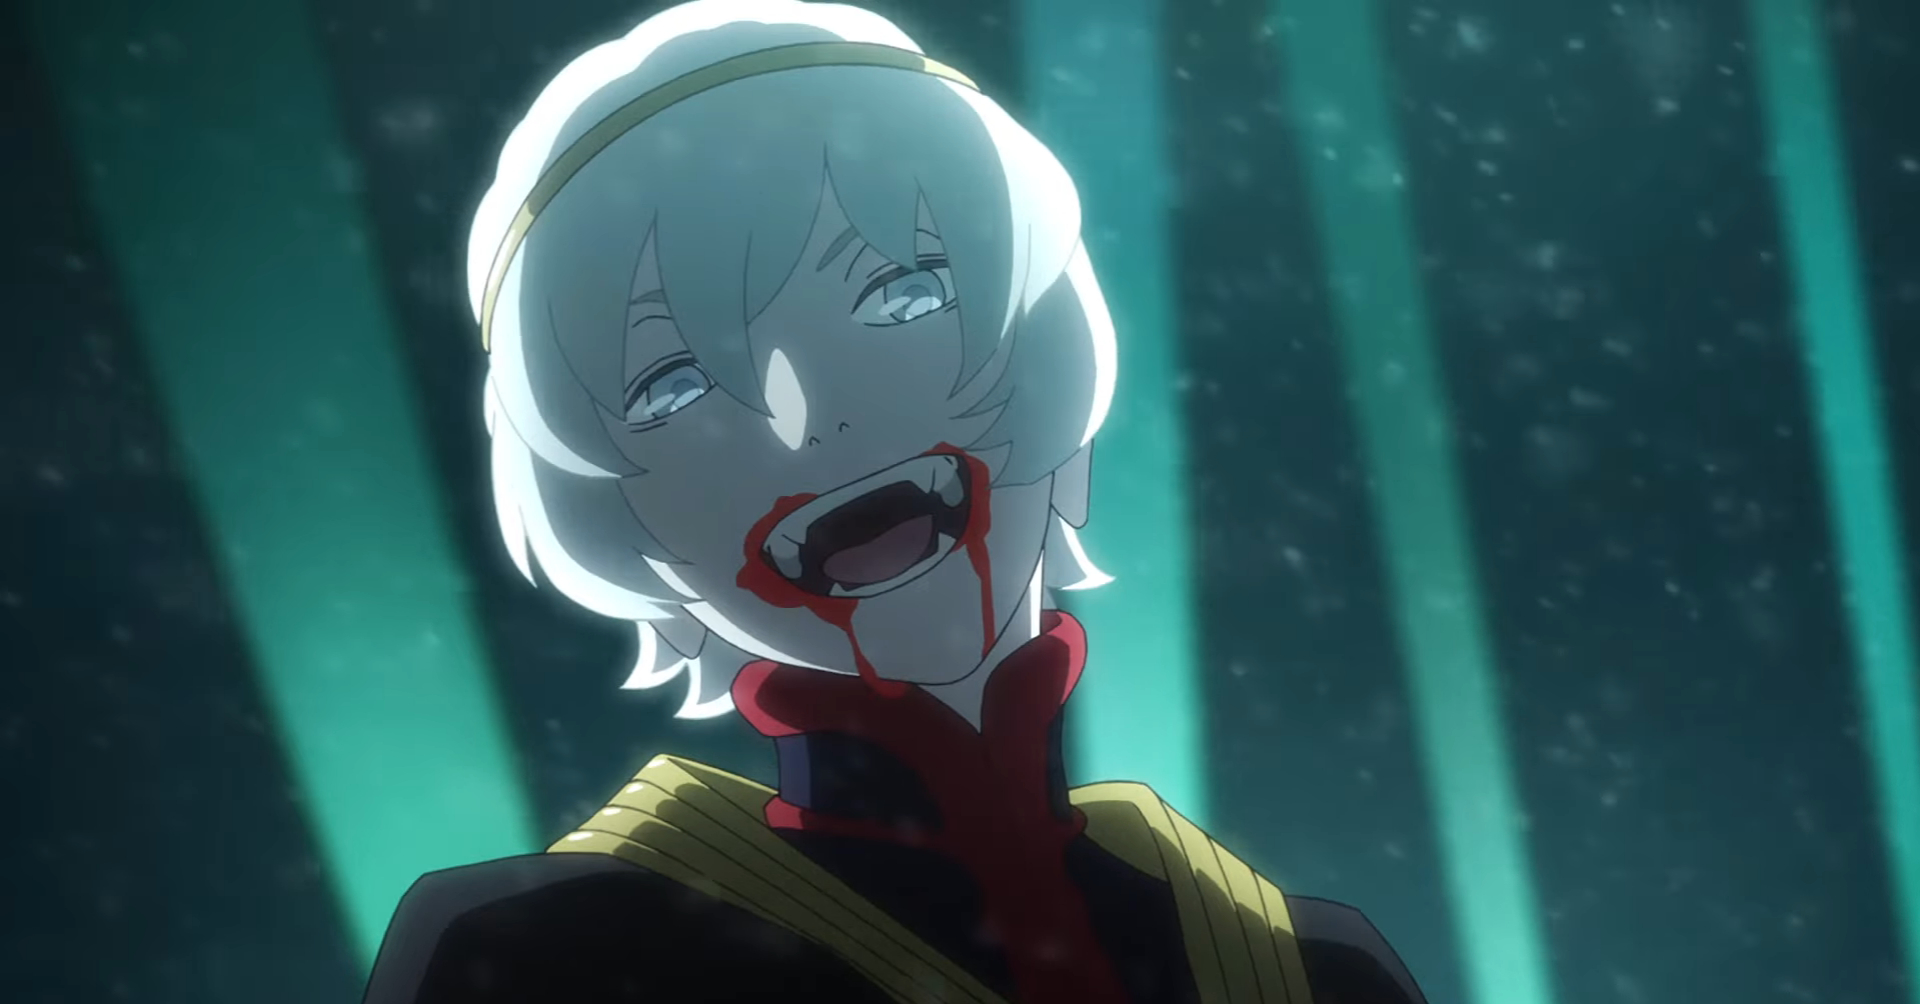 Vampire in the Garden Review Another forgettable and rushed anime series